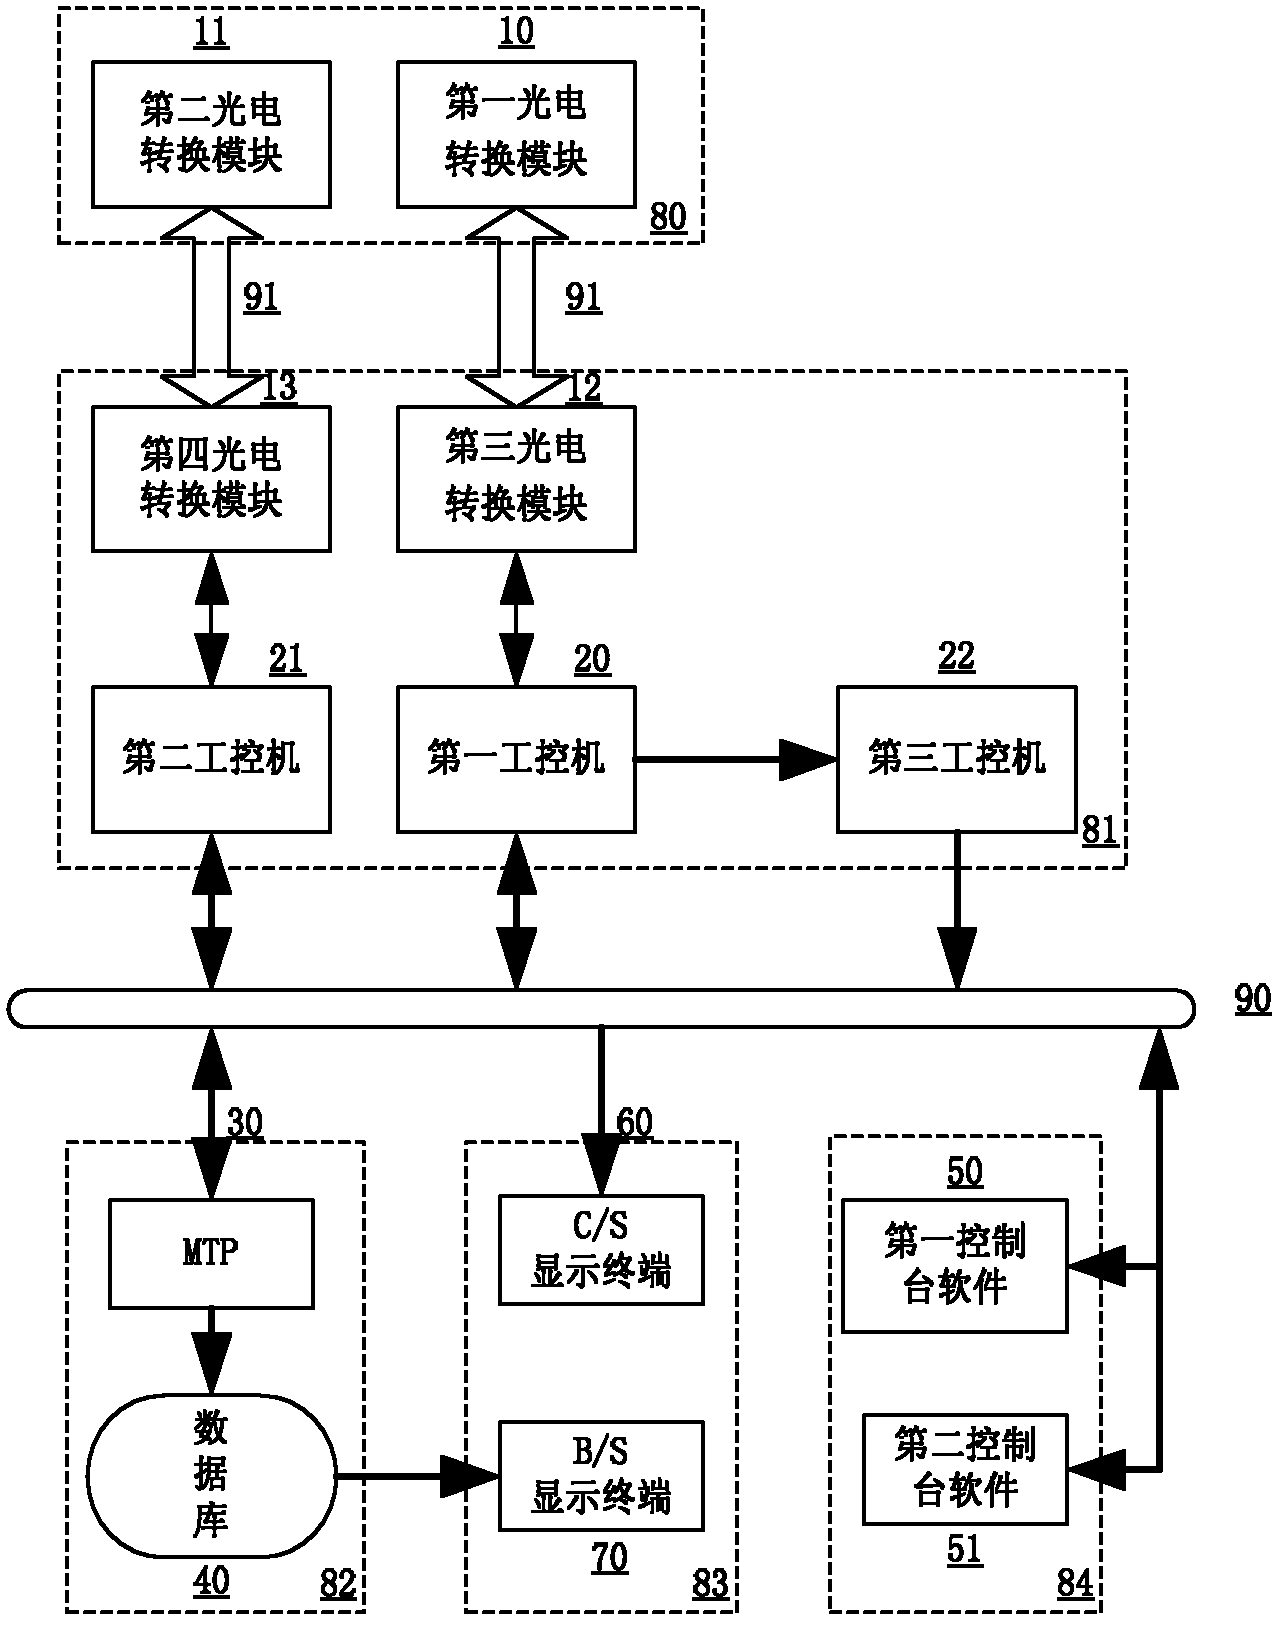 Universal satellite ground overall control test system